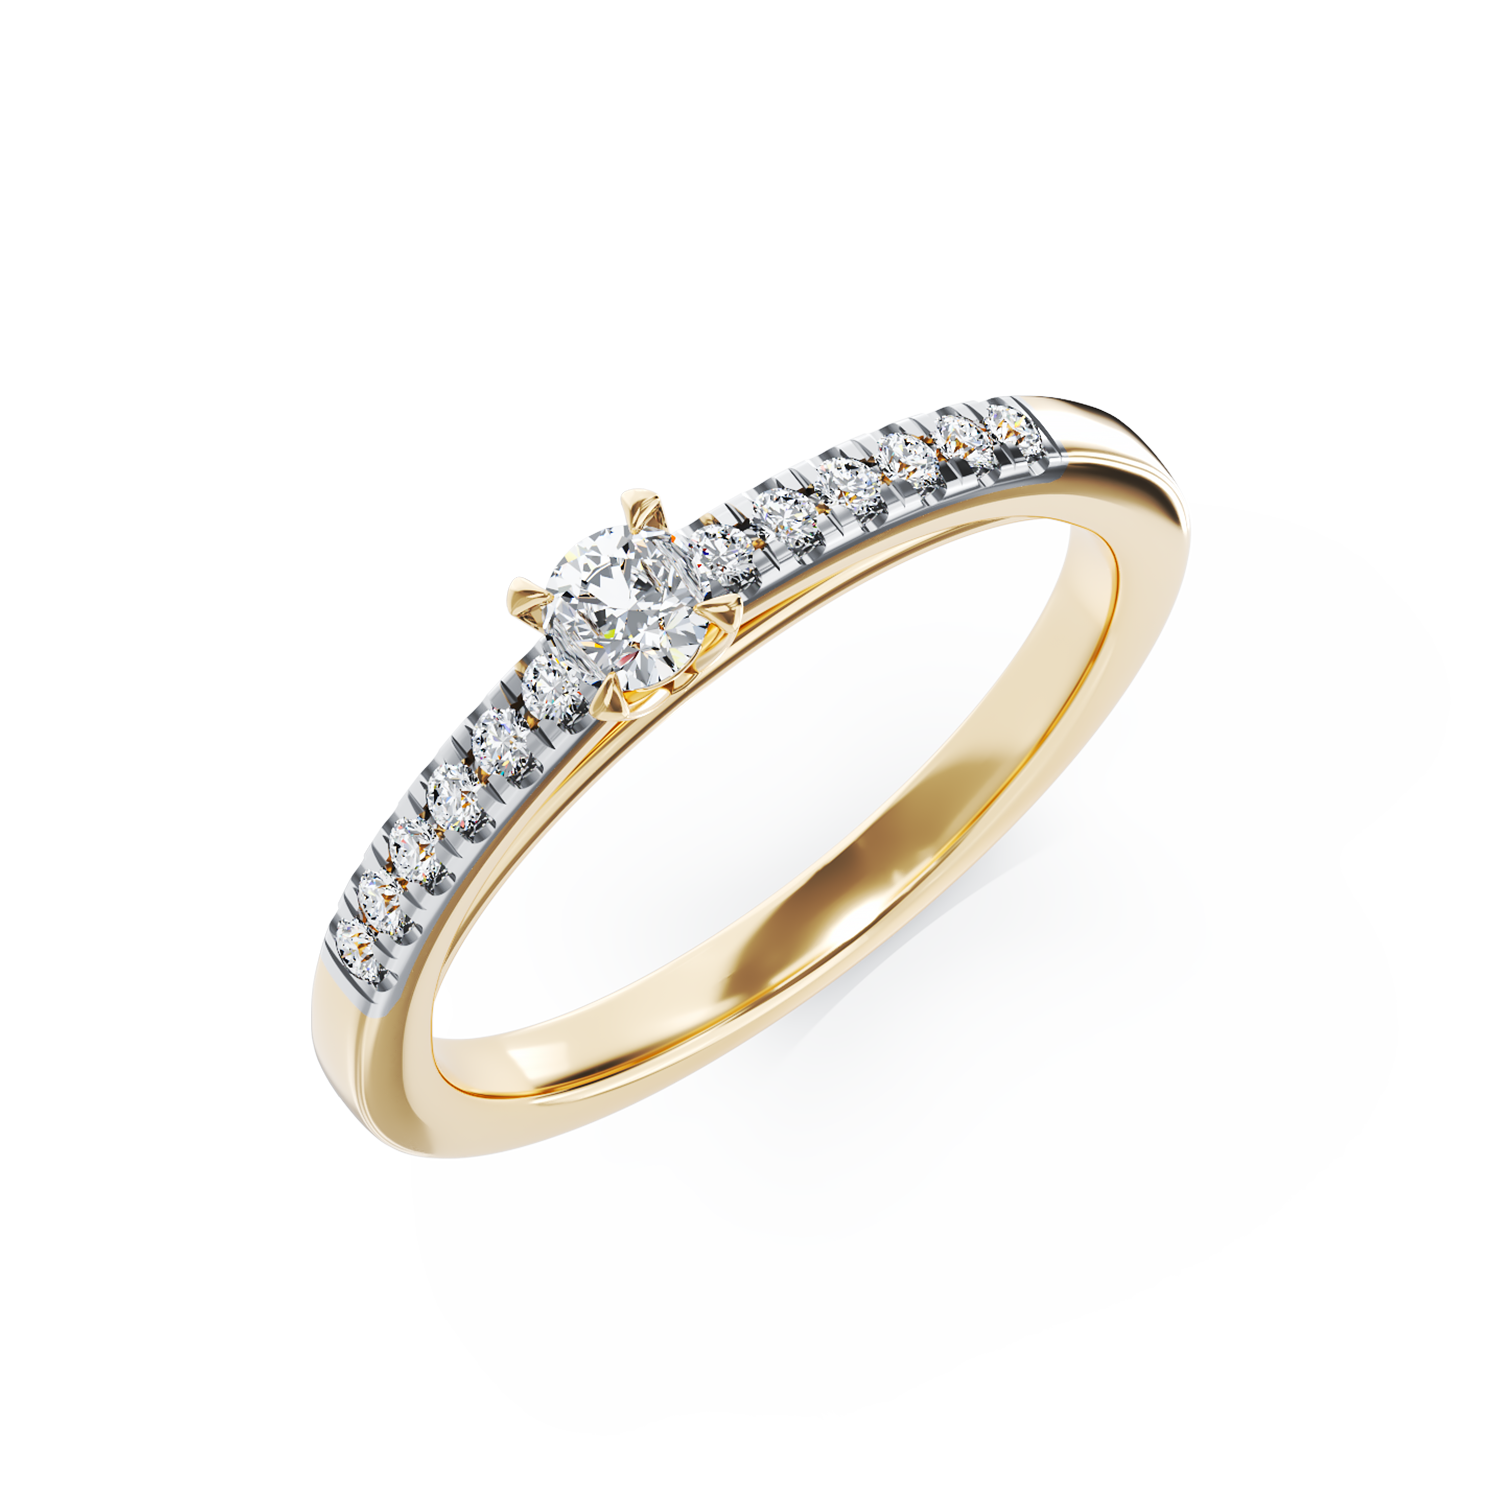 18K yellow gold engagement ring with 0.3ct diamond and 0.14ct diamonds